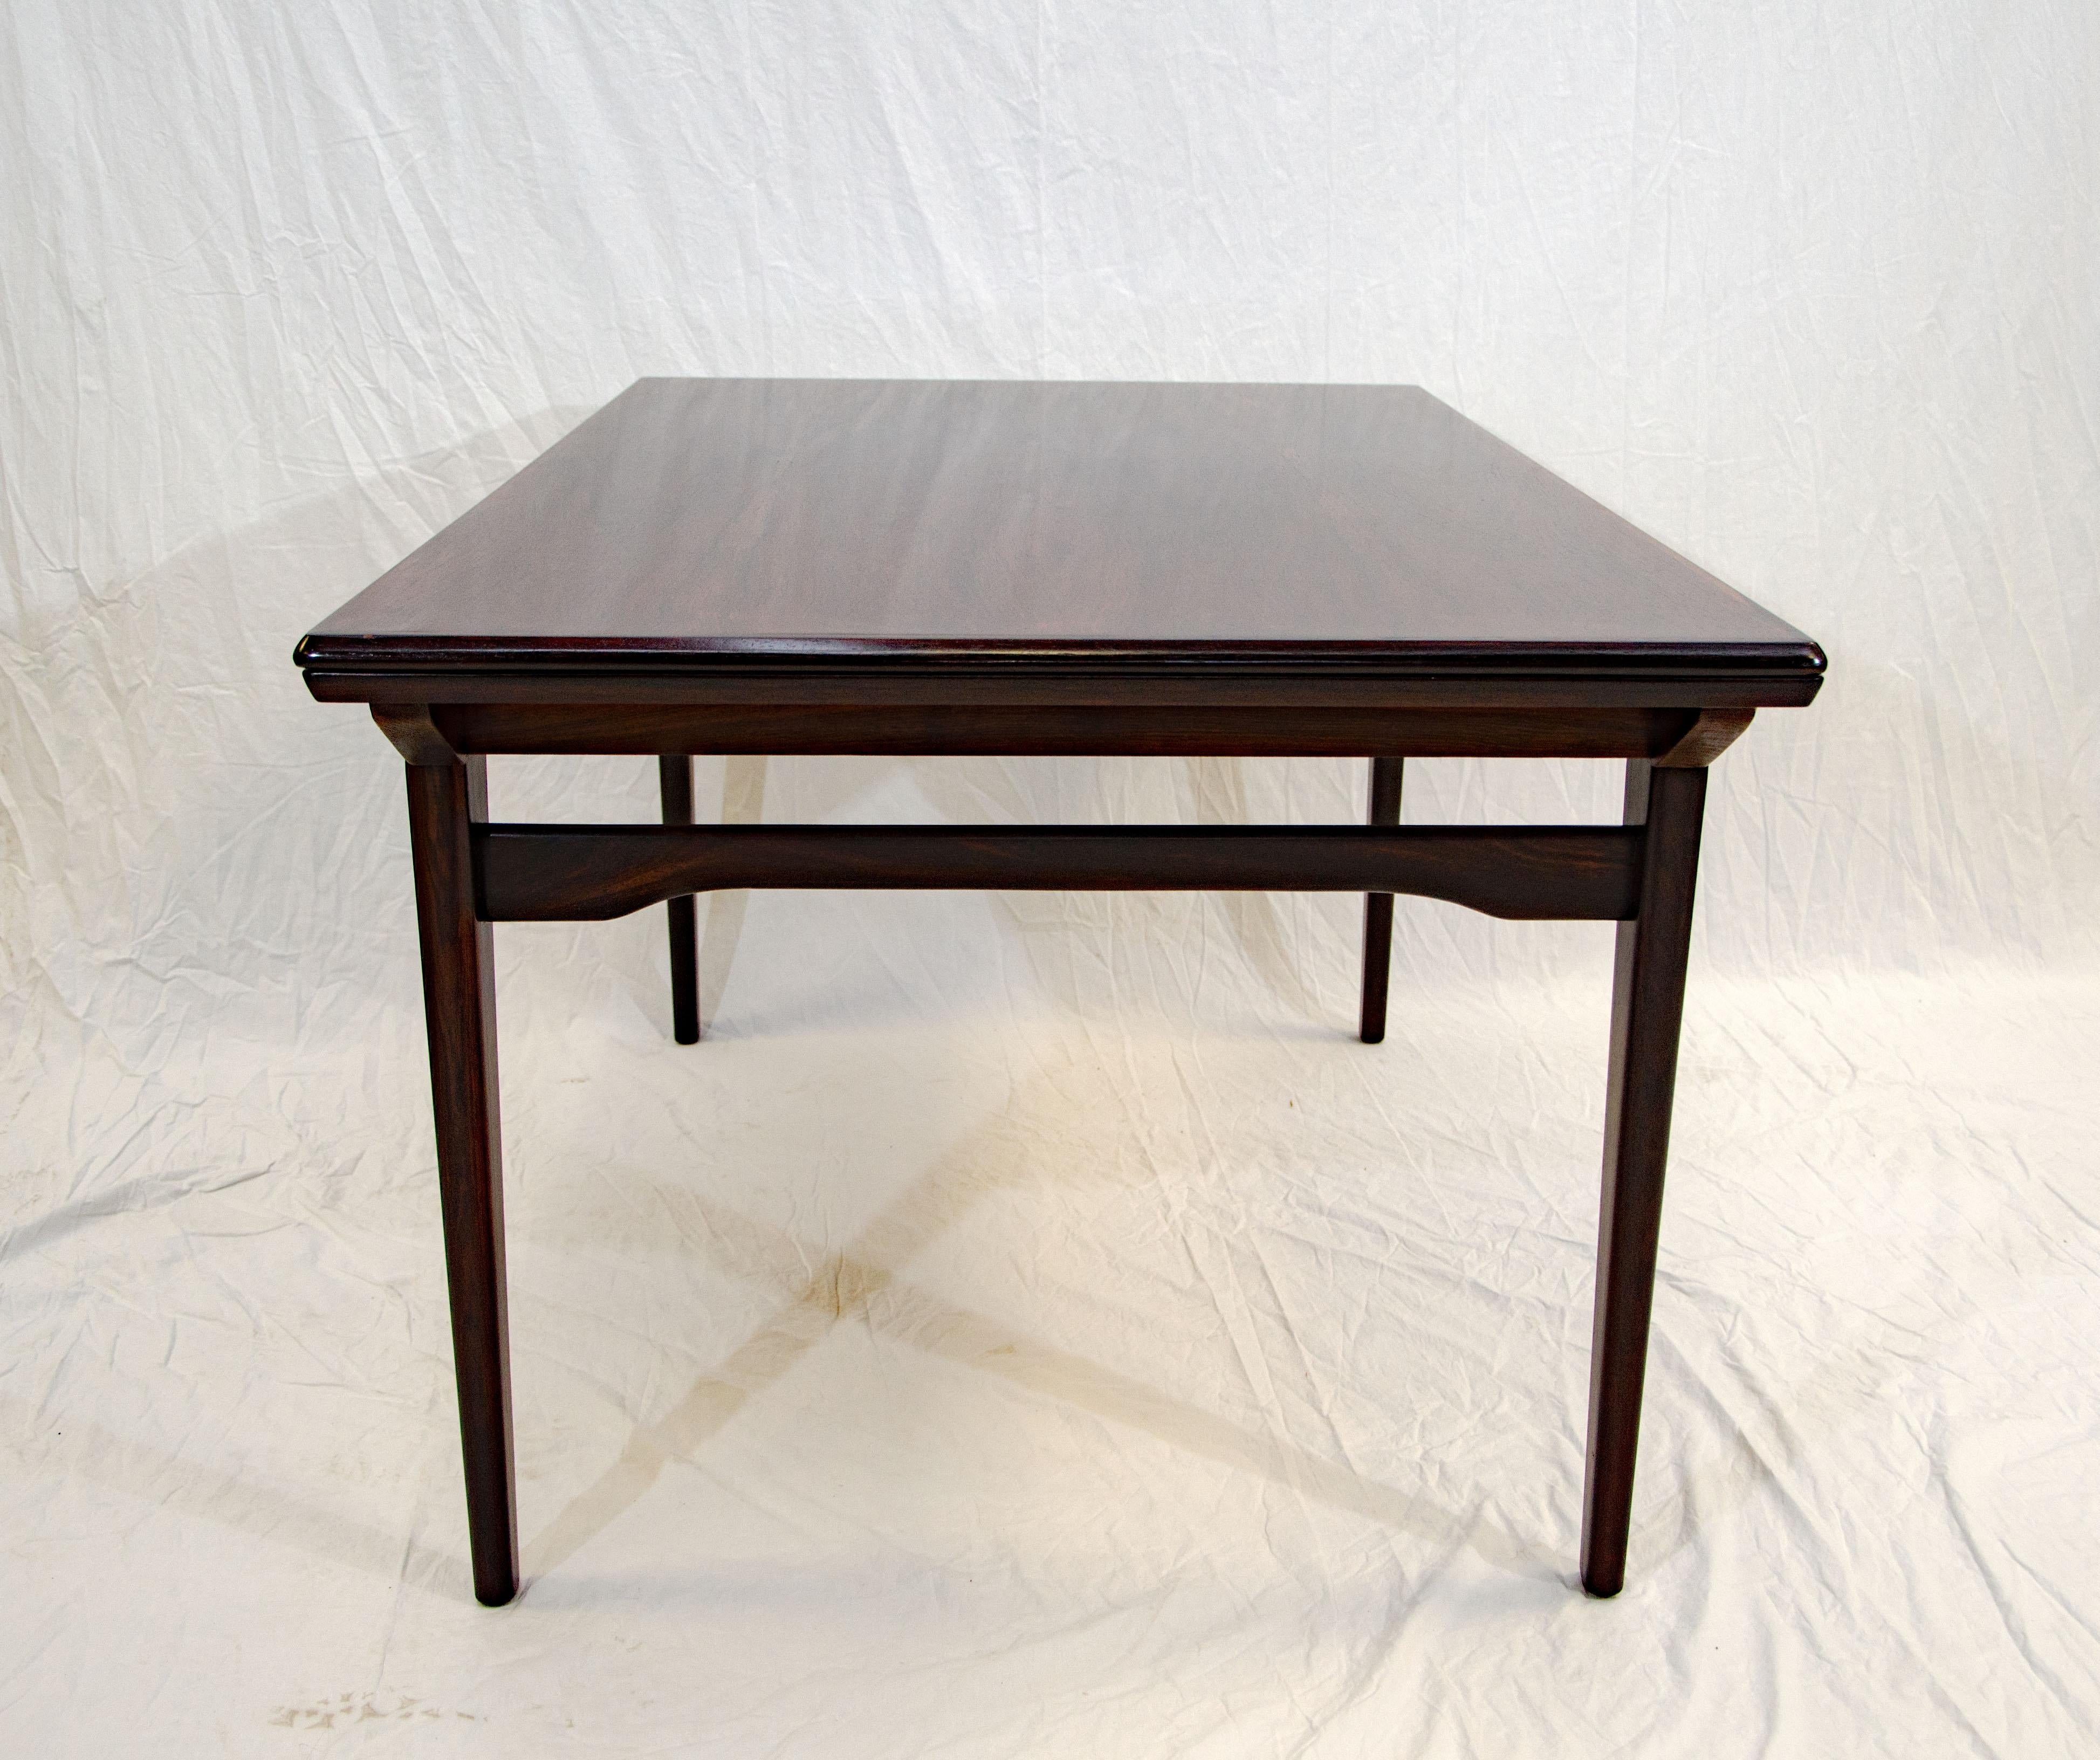 20th Century Rosewood Dining Table with Two Draw Leaves, N. O. Møller